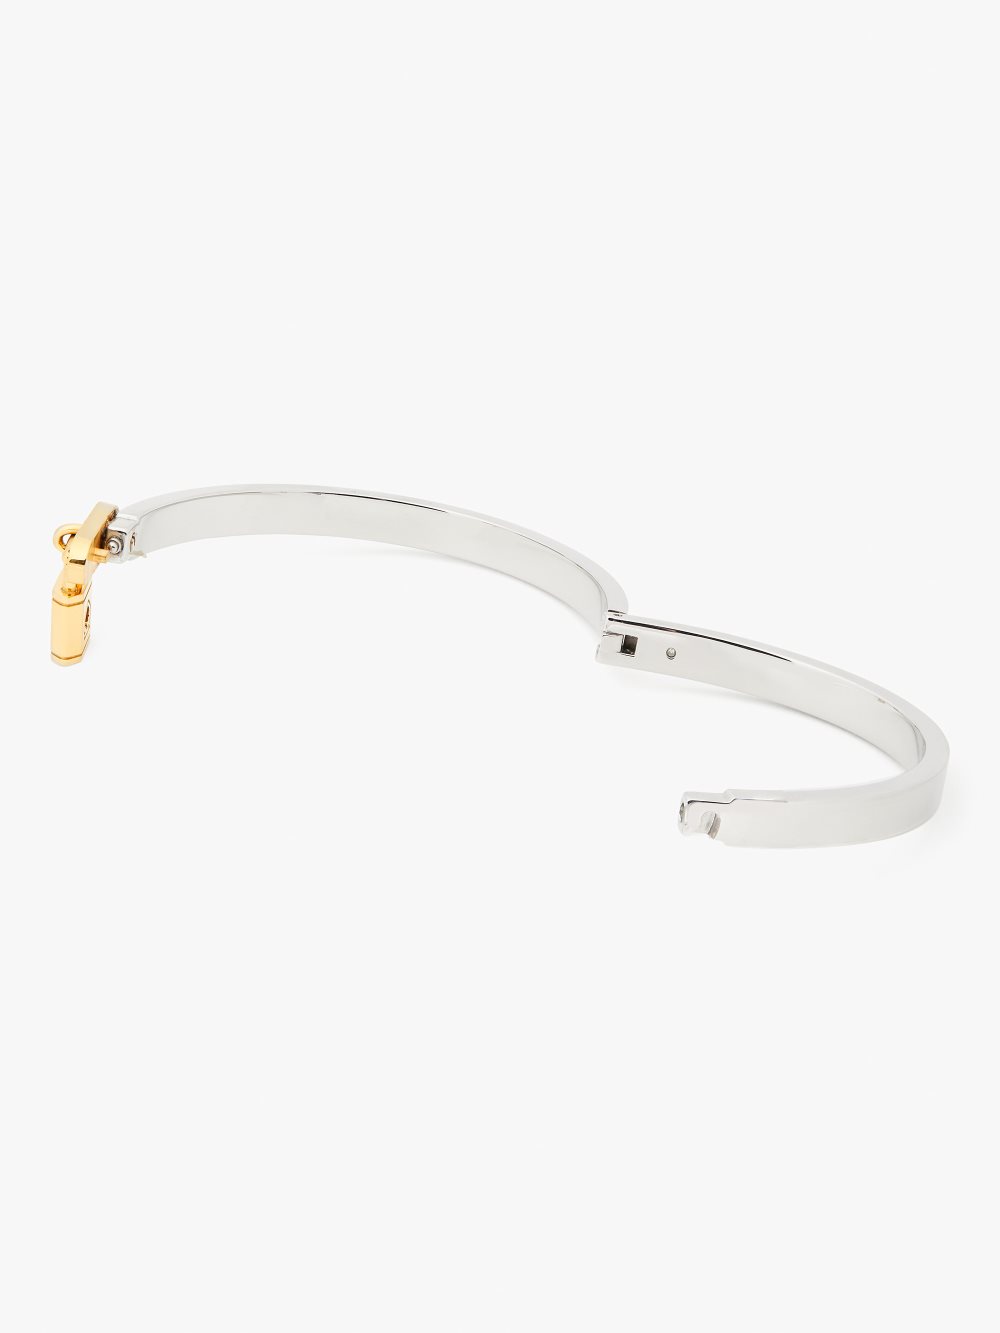 Women's silver gold lock and spade charm bangle | Kate Spade